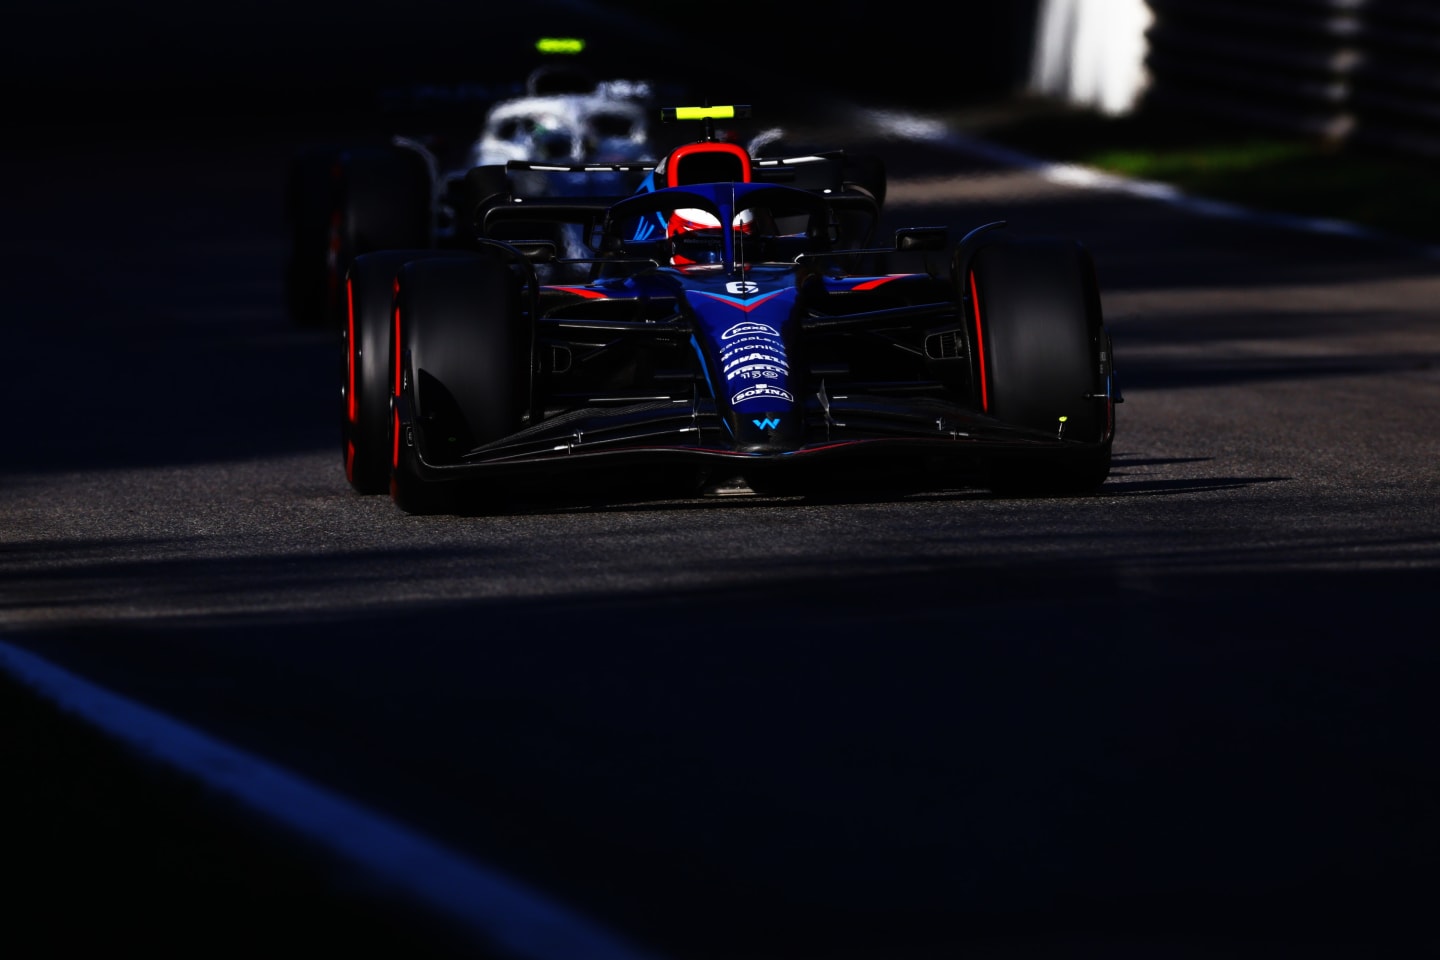 MONZA, ITALY - SEPTEMBER 09: Nicholas Latifi of Canada driving the (6) Williams FW44 Mercedes on track during practice ahead of the F1 Grand Prix of Italy at Autodromo Nazionale Monza on September 09, 2022 in Monza, Italy. (Photo by Mark Thompson/Getty Images)